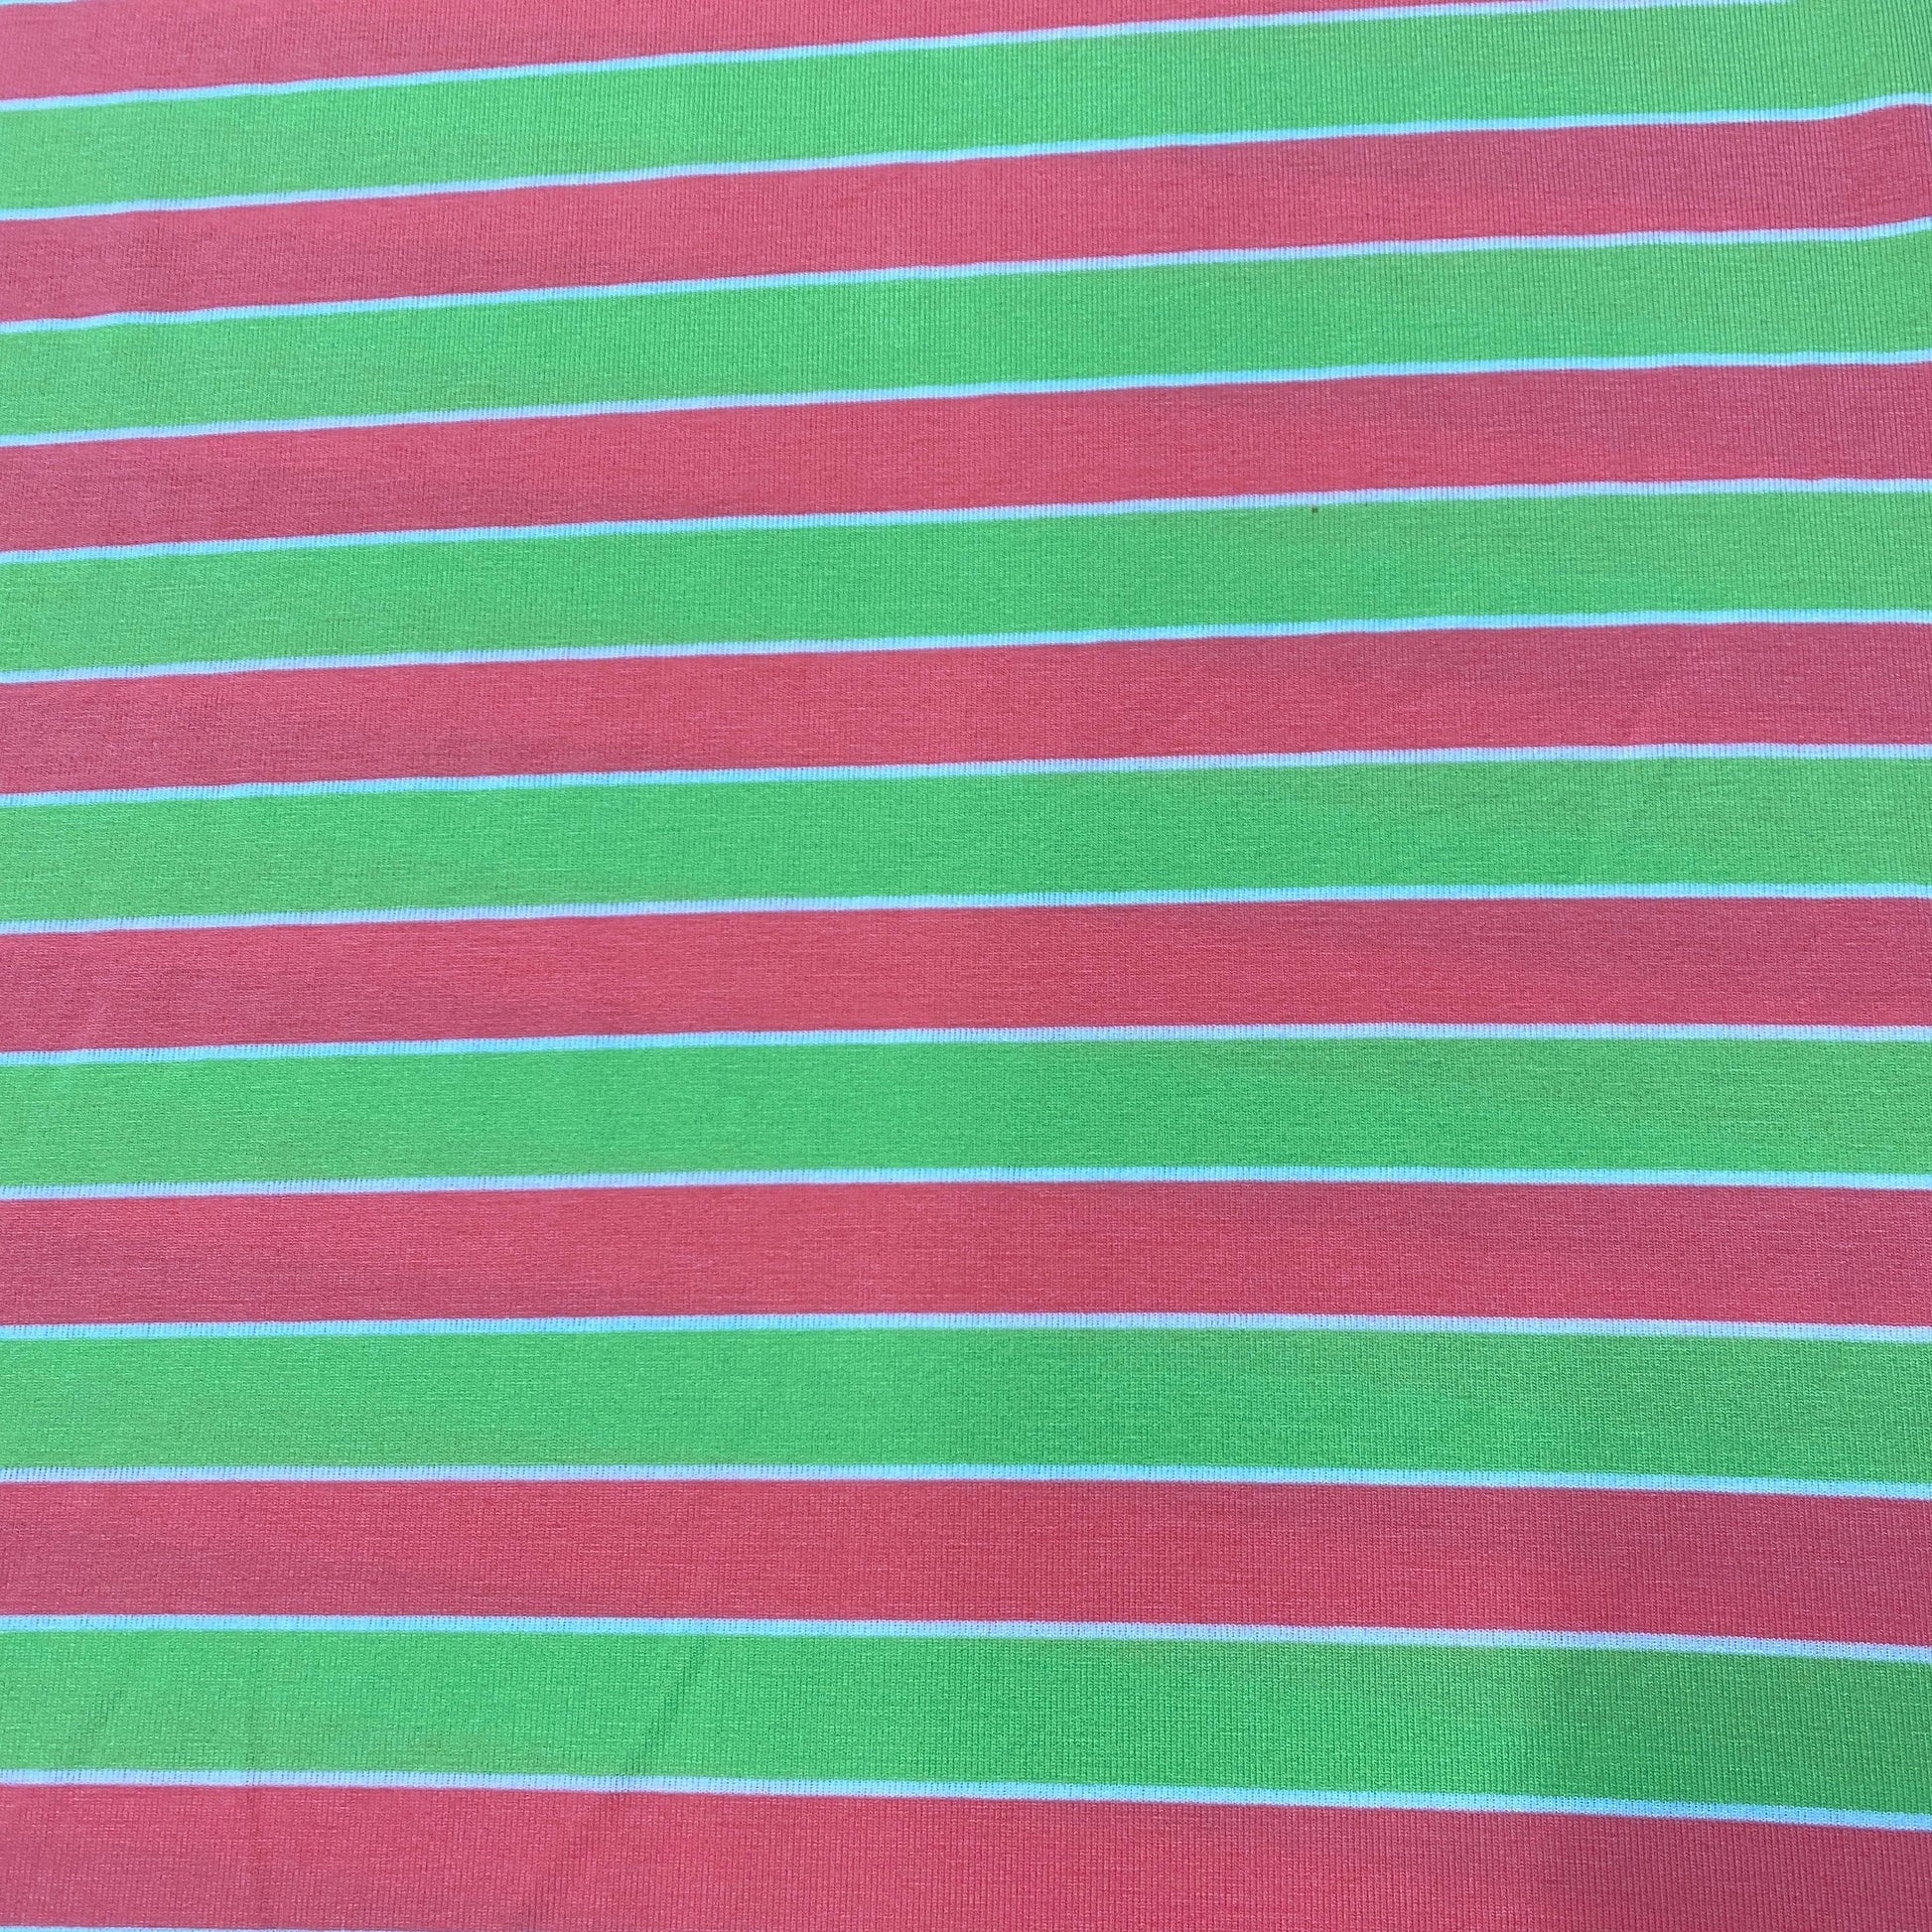 Orange and Lime 1" Stripes on Cotton/Spandex Jersey Fabric - Nature's Fabrics